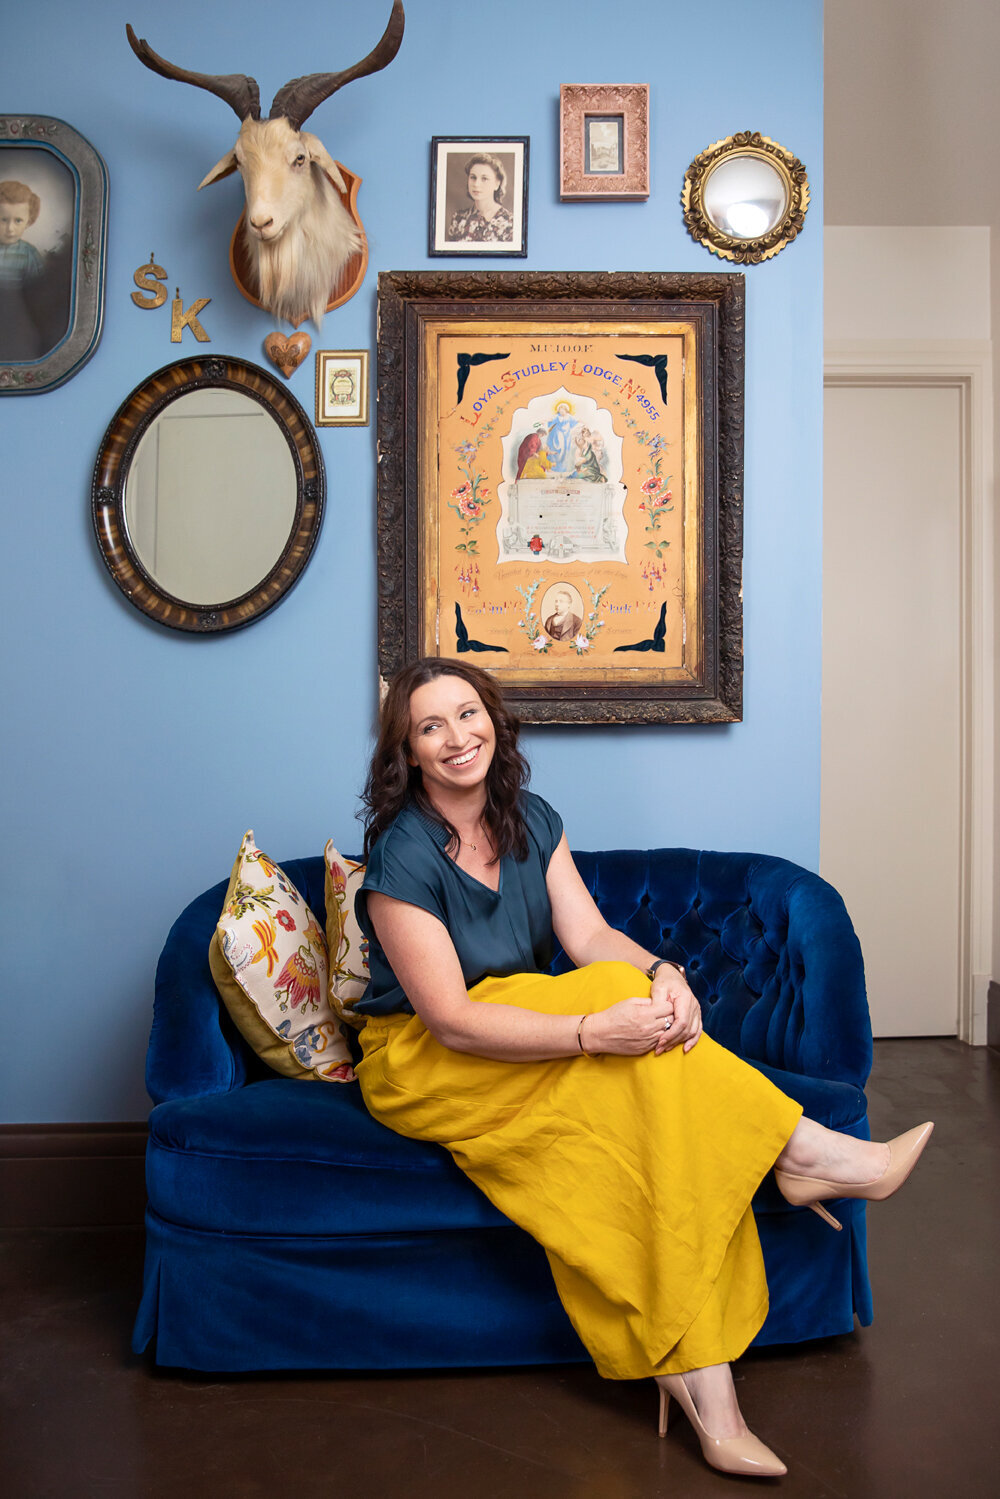 Business woman sitting on a blue couch